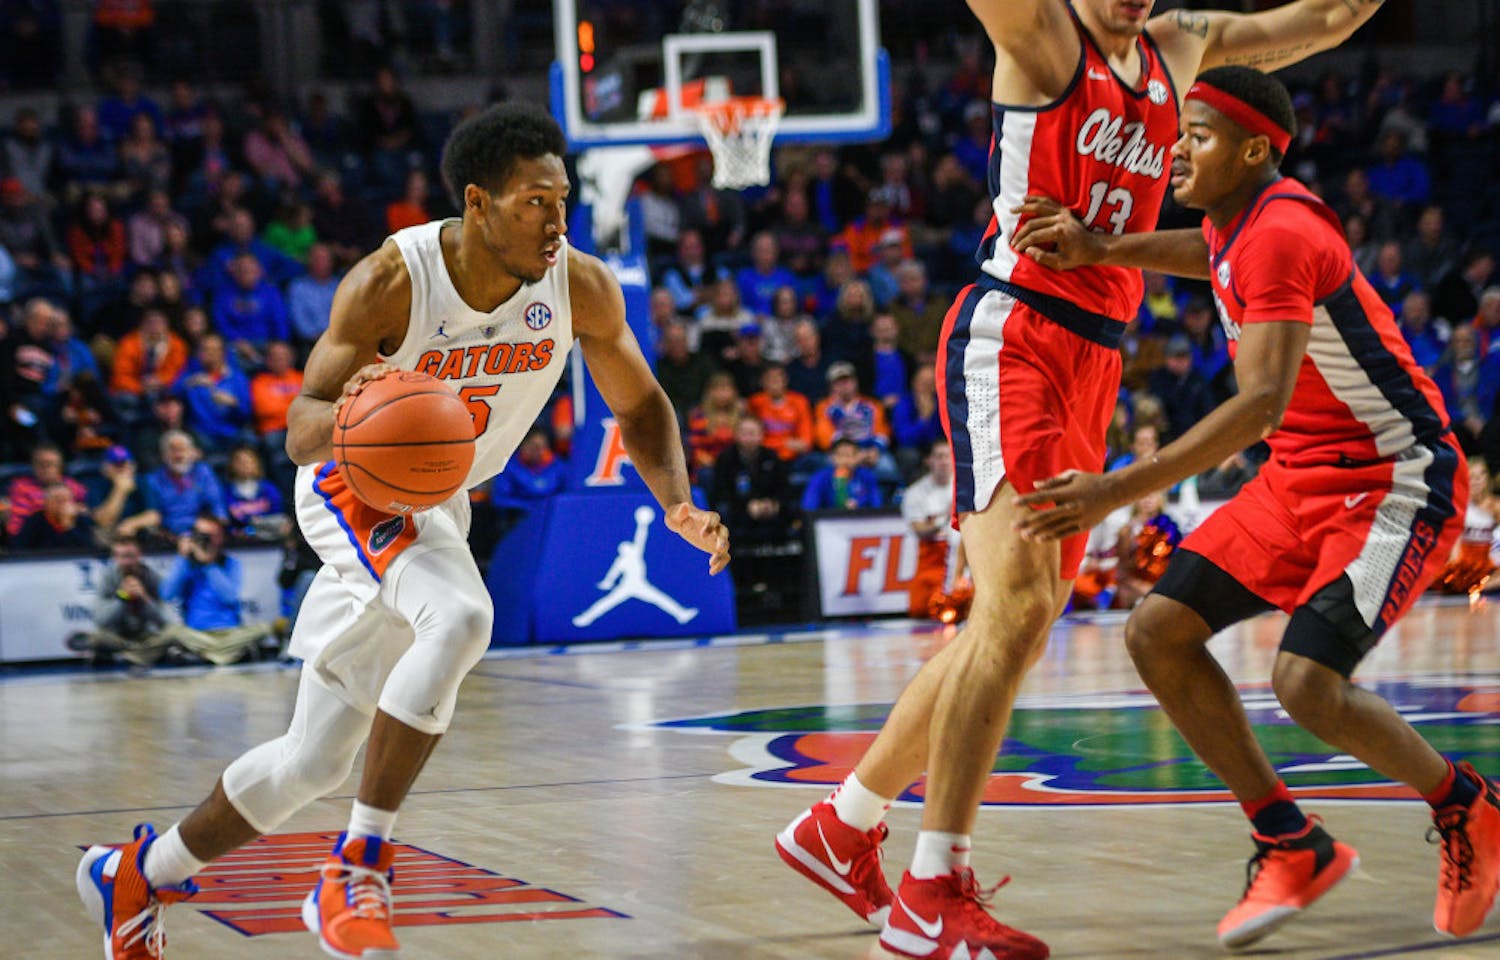 Senior guard KeVaughn Allen scored 21 points with five assists in the Gators' 90-86 overtime win over Ole Miss.